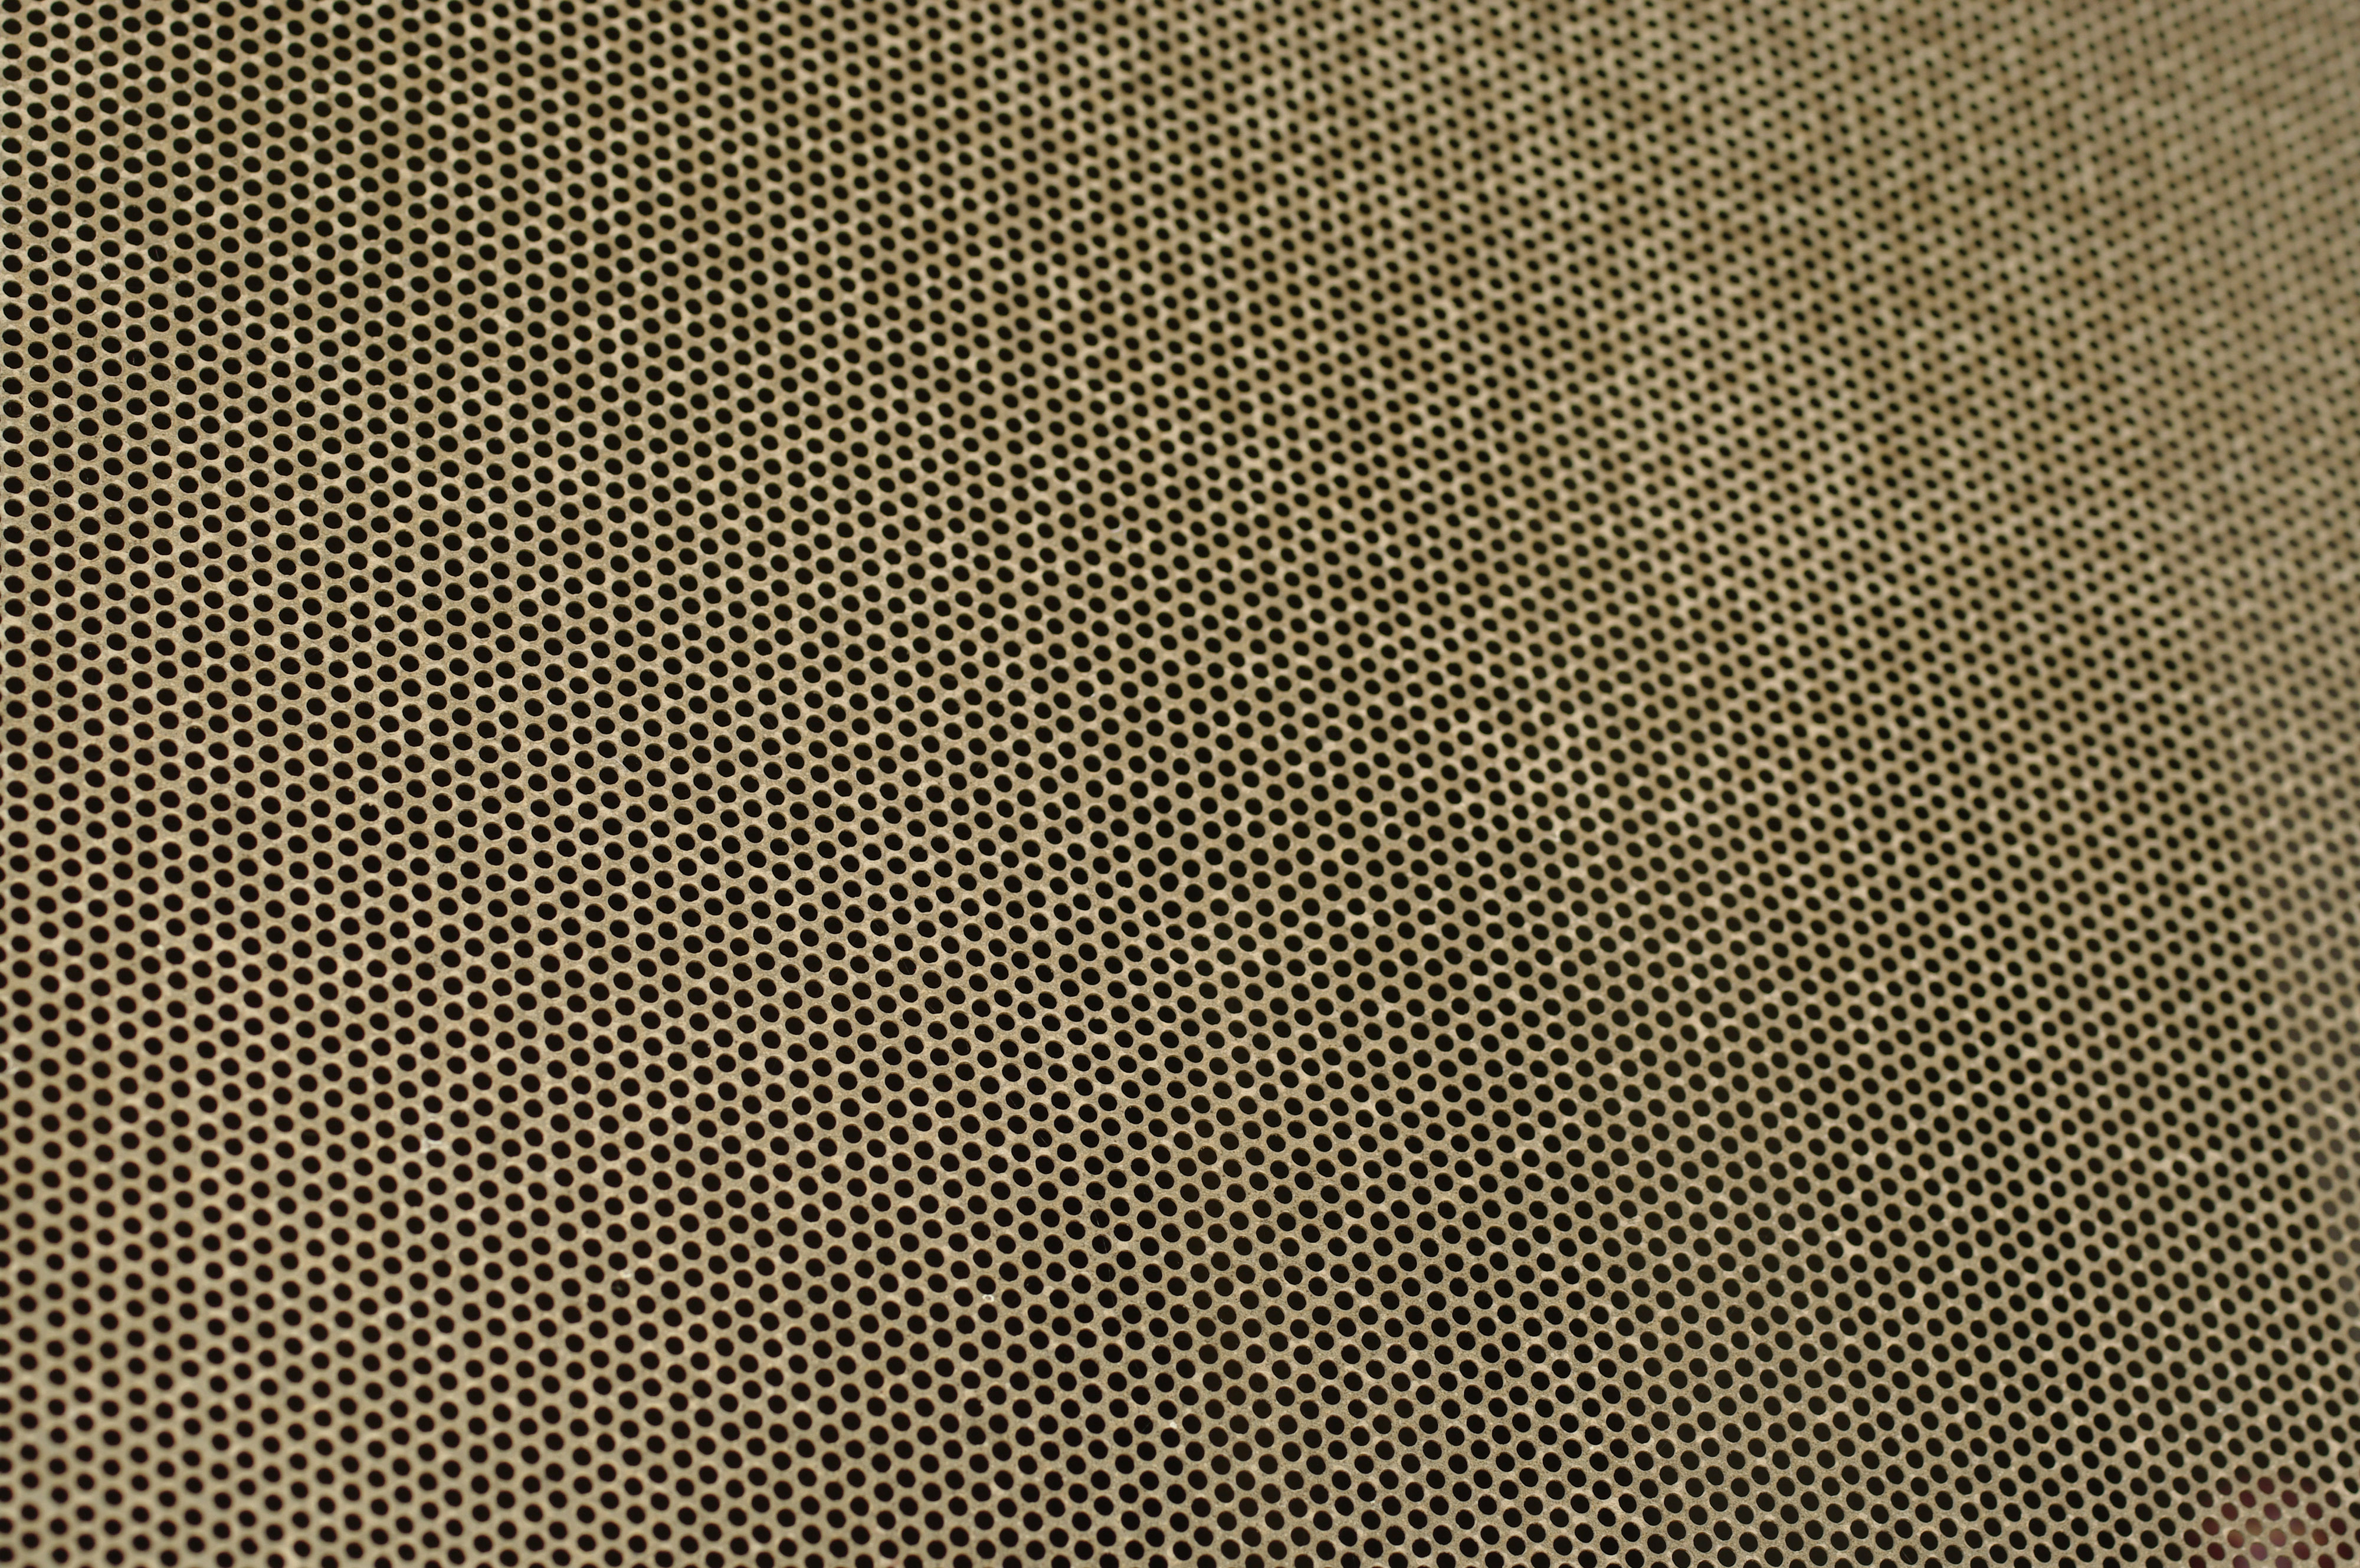 more dirty brass metal mesh screen background textures